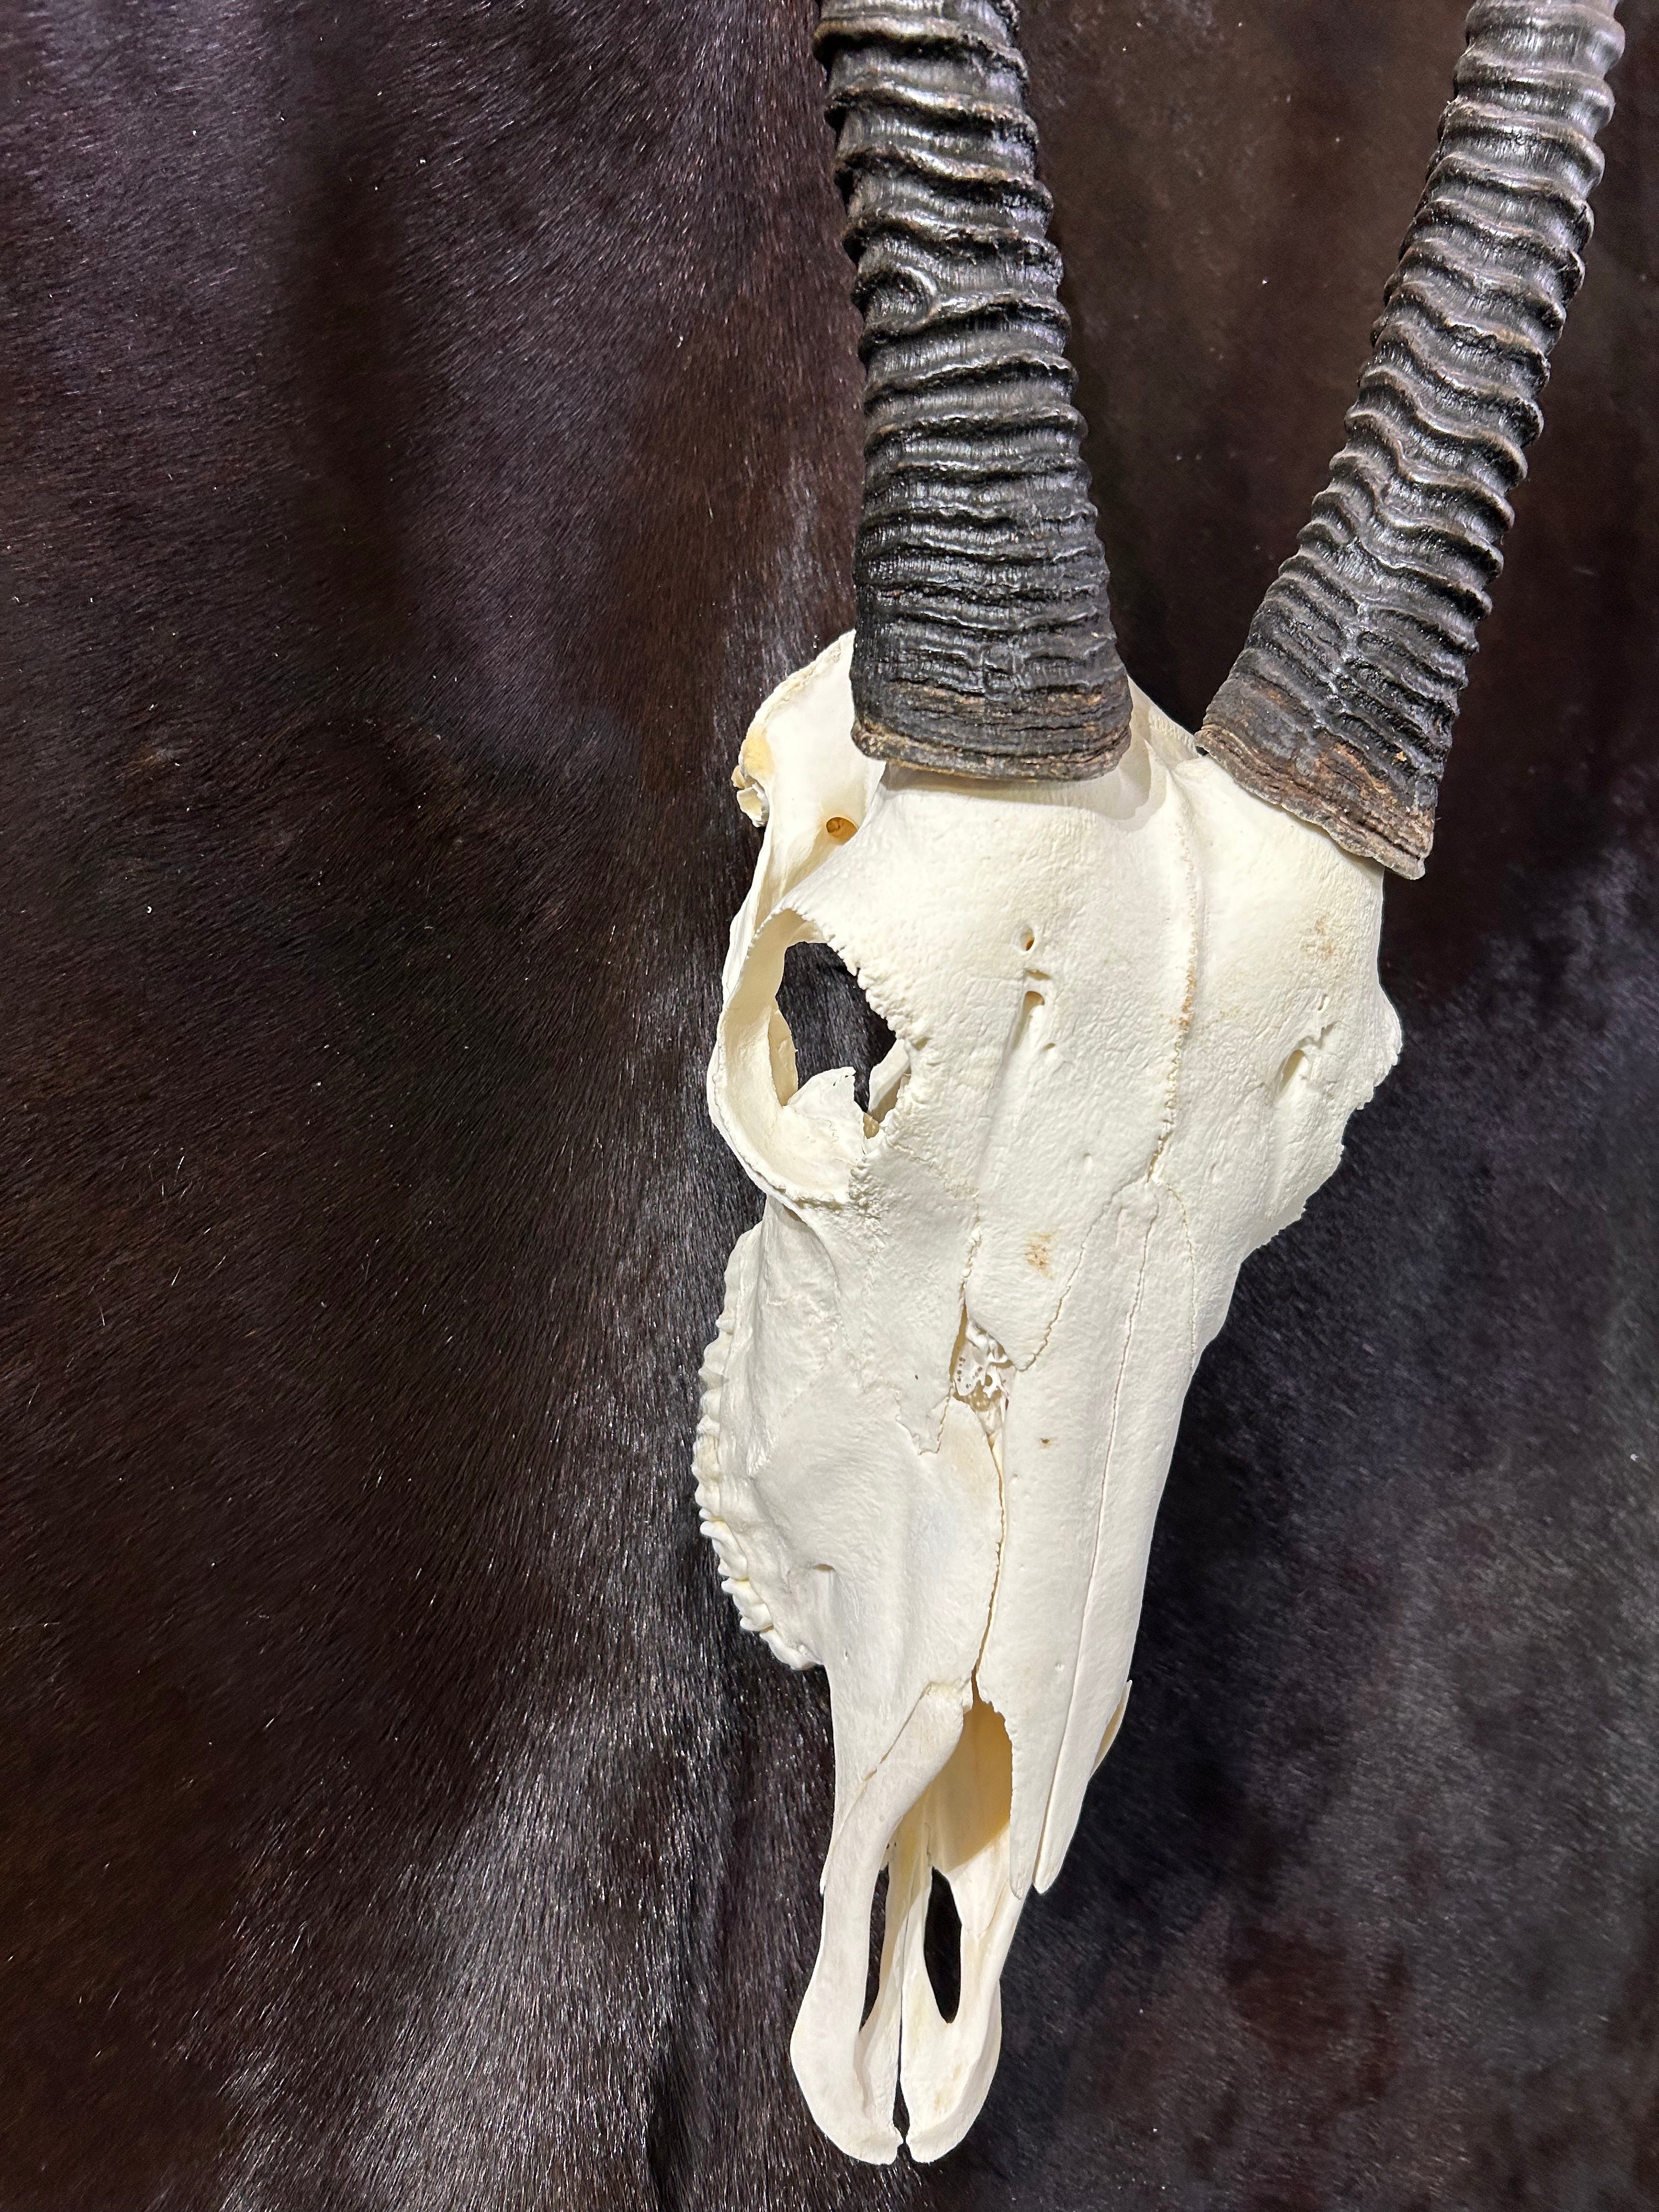 BIG Oryx Skull - African Antelope Horn + Gemsbok Skull (Horns are around 33 and 32 inches)